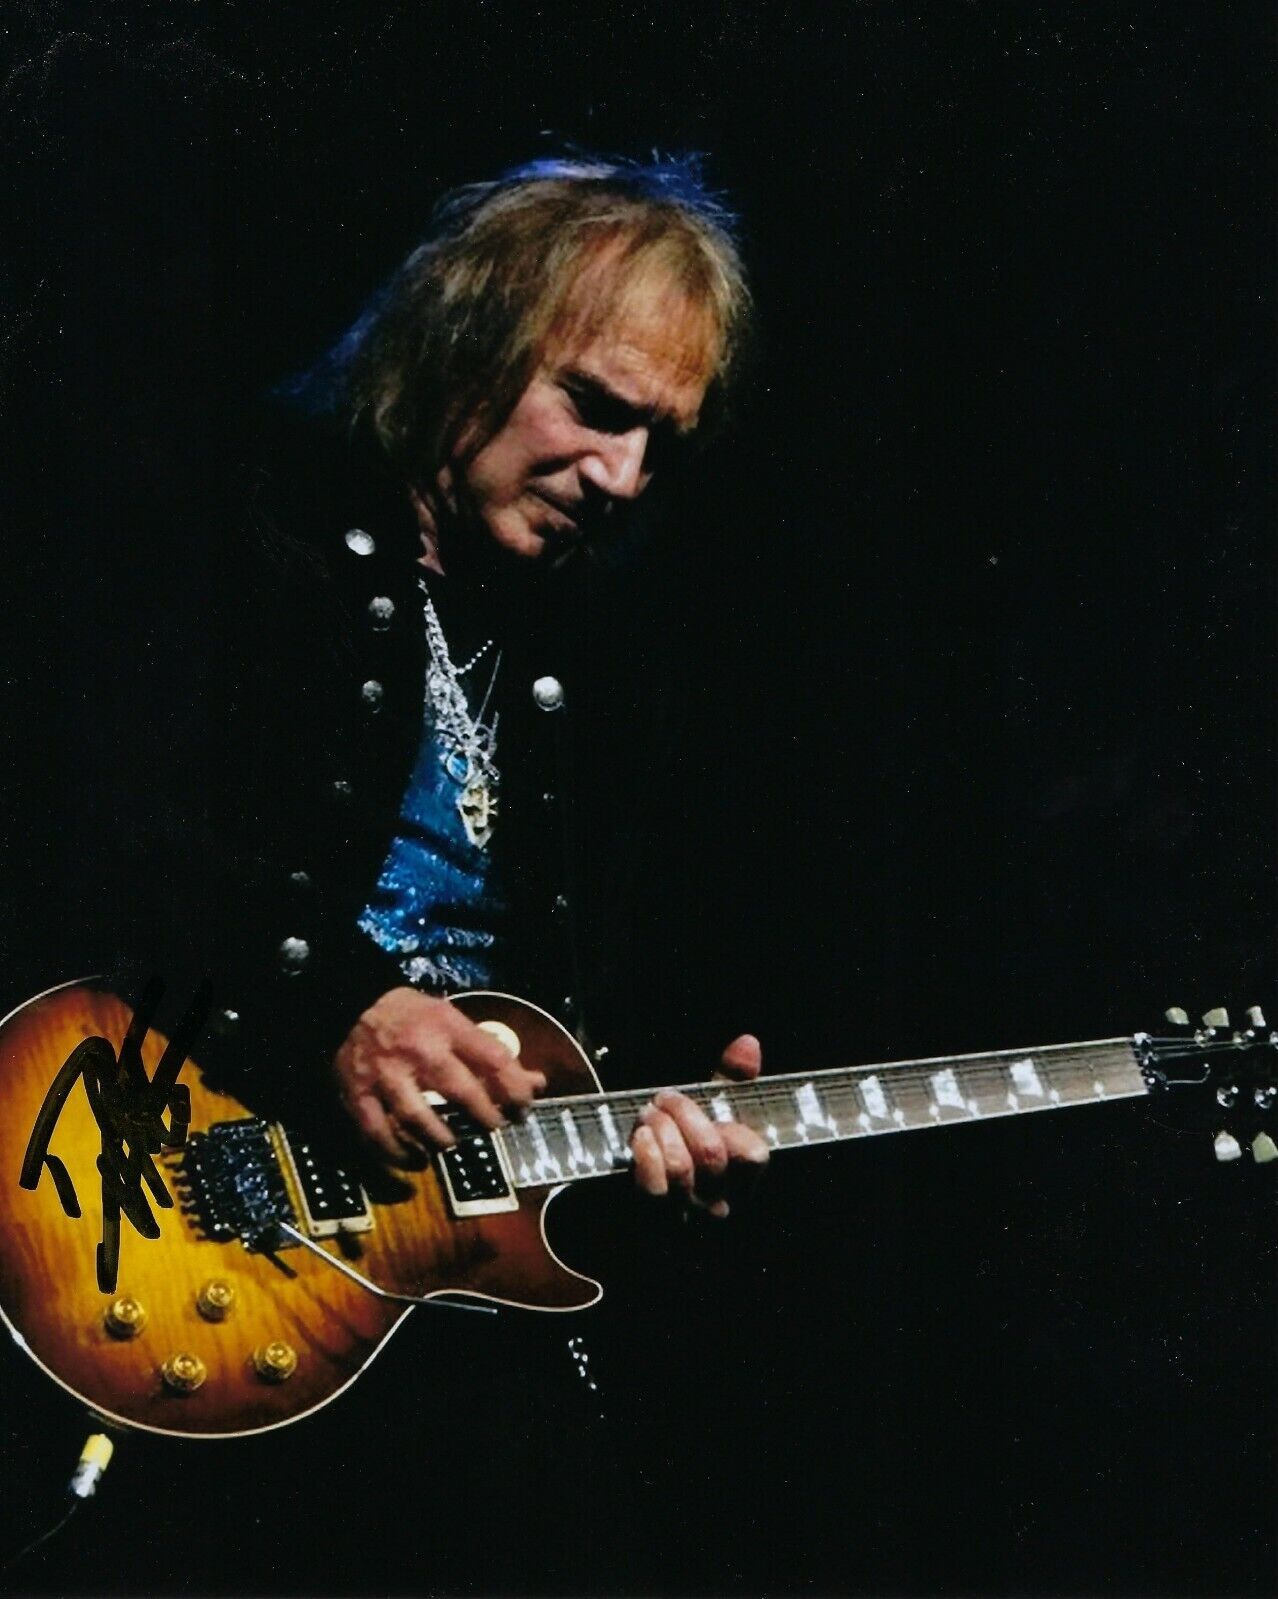 GFA REO Speedwagon Band Guitarist * DAVE AMATO * Signed 8x10 Photo Poster painting PROOF COA